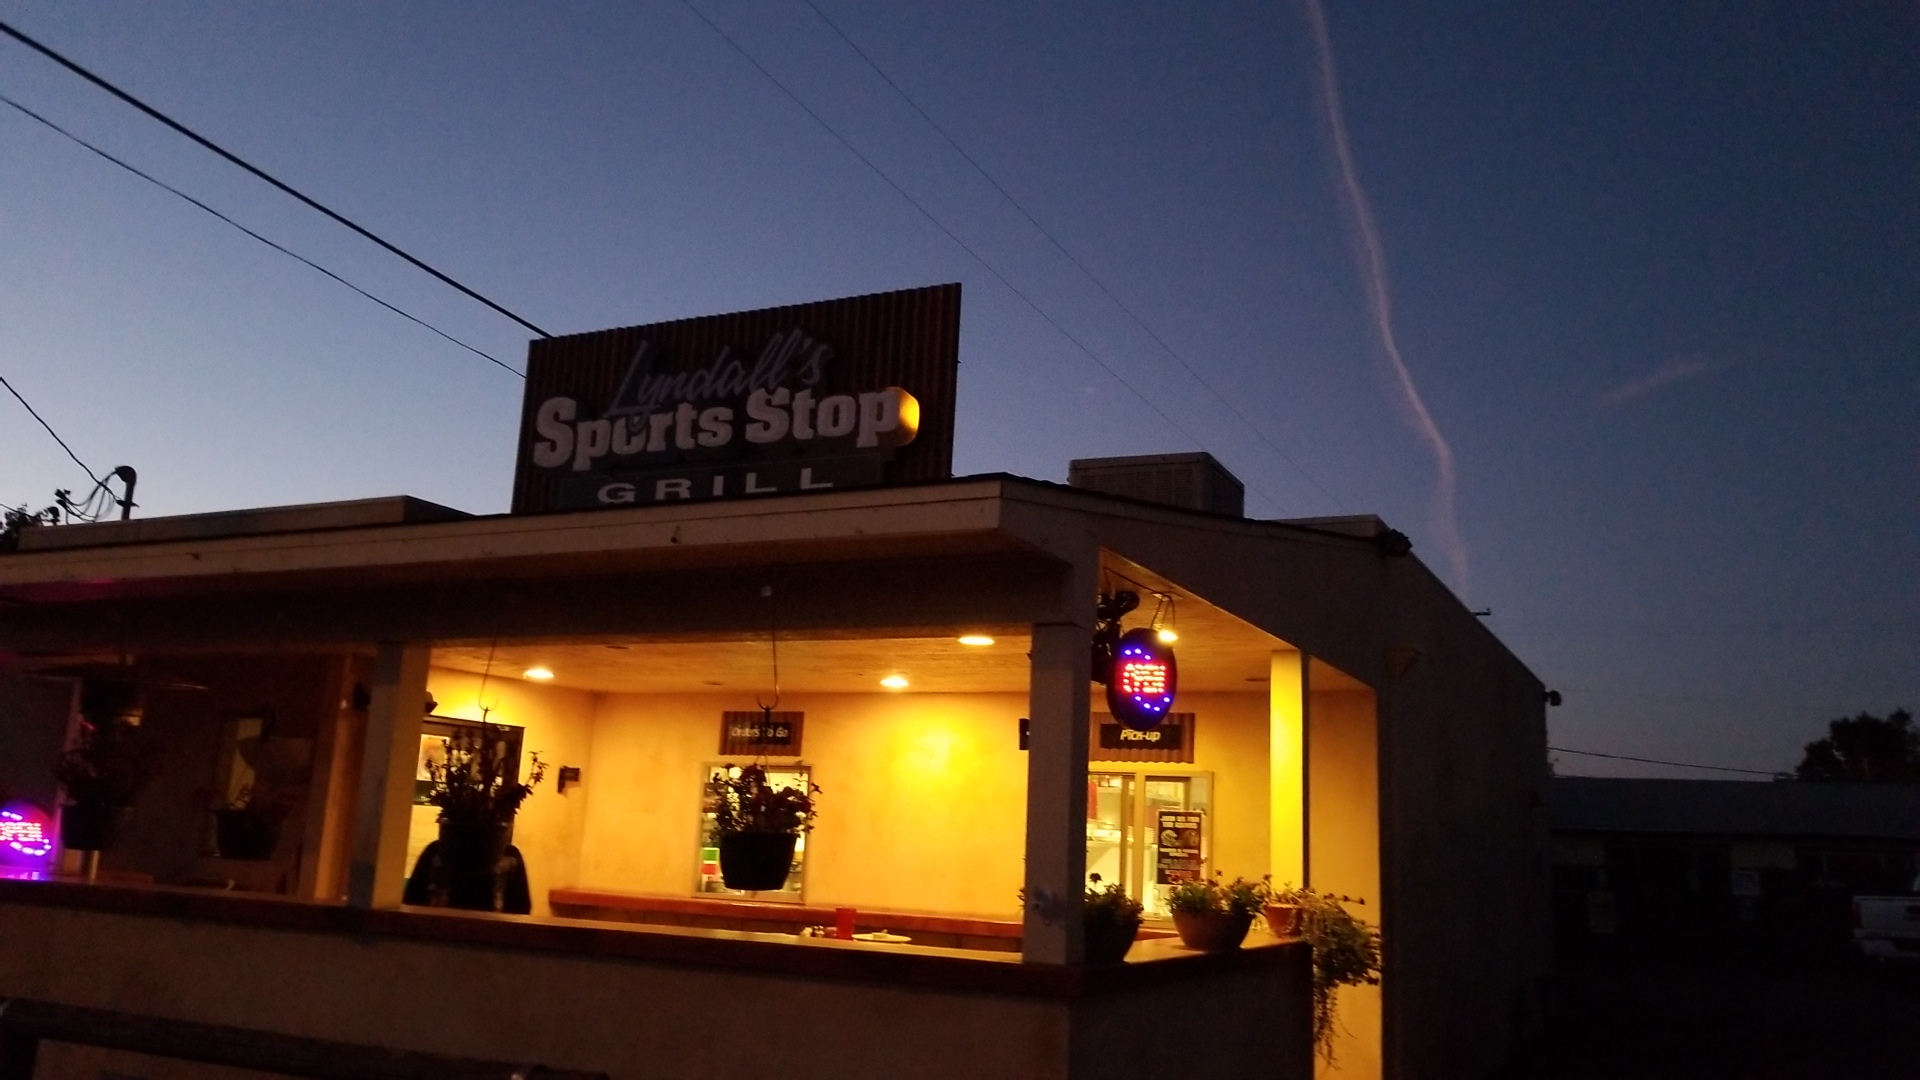 Lyndall's Sports Stop Grill